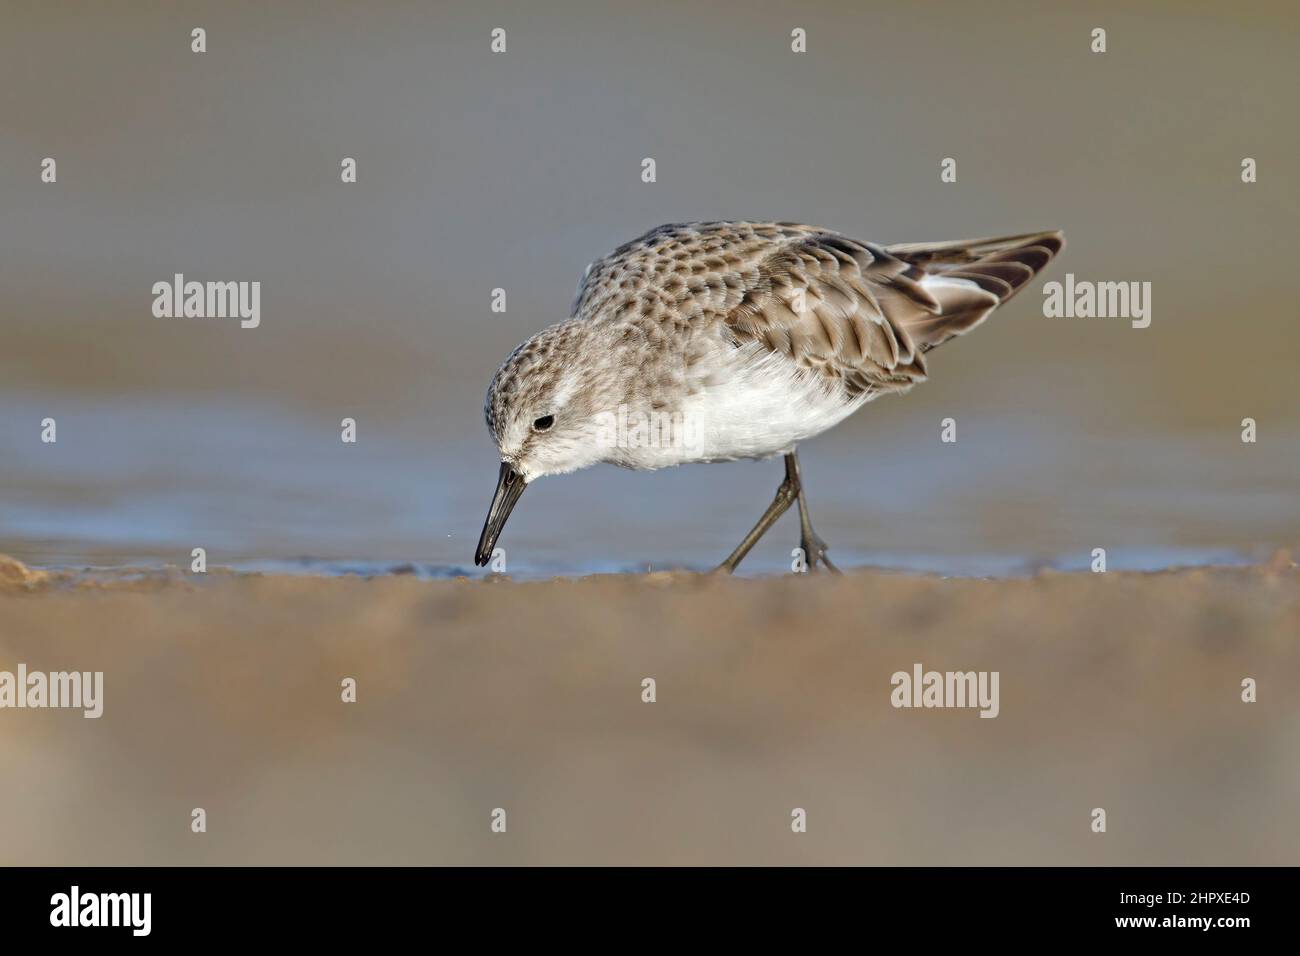 Little stint, Circeo National park (LT), Italy, March 2017 Stock Photo